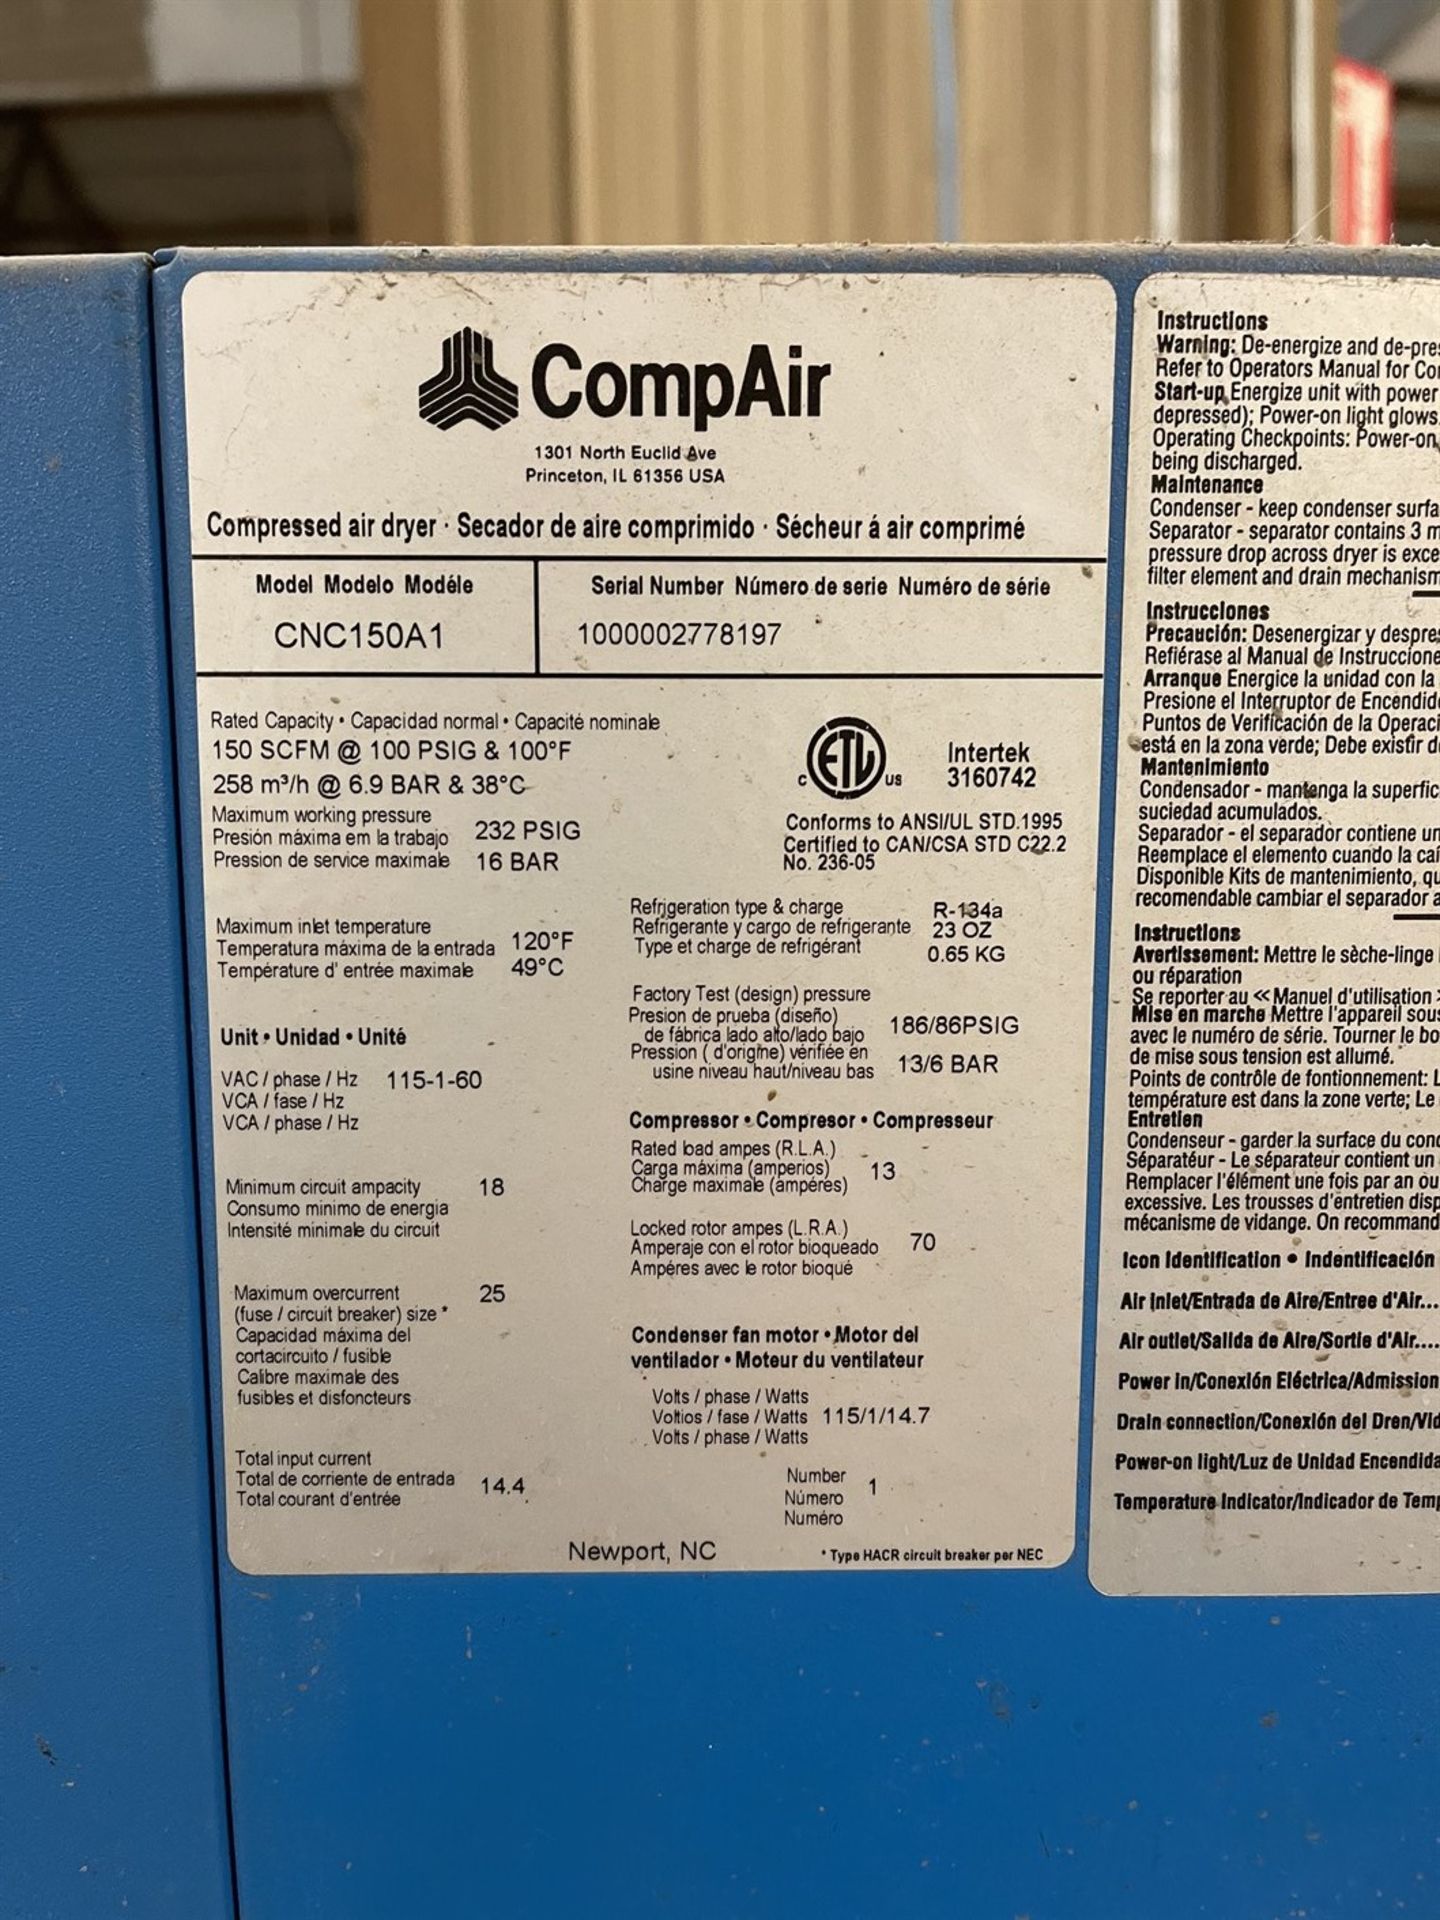 2012 CompAir L22 L-Series Air Station Compressor System, s/n D102821, 30 HP, 125 PSI, w/ compare - Image 5 of 6